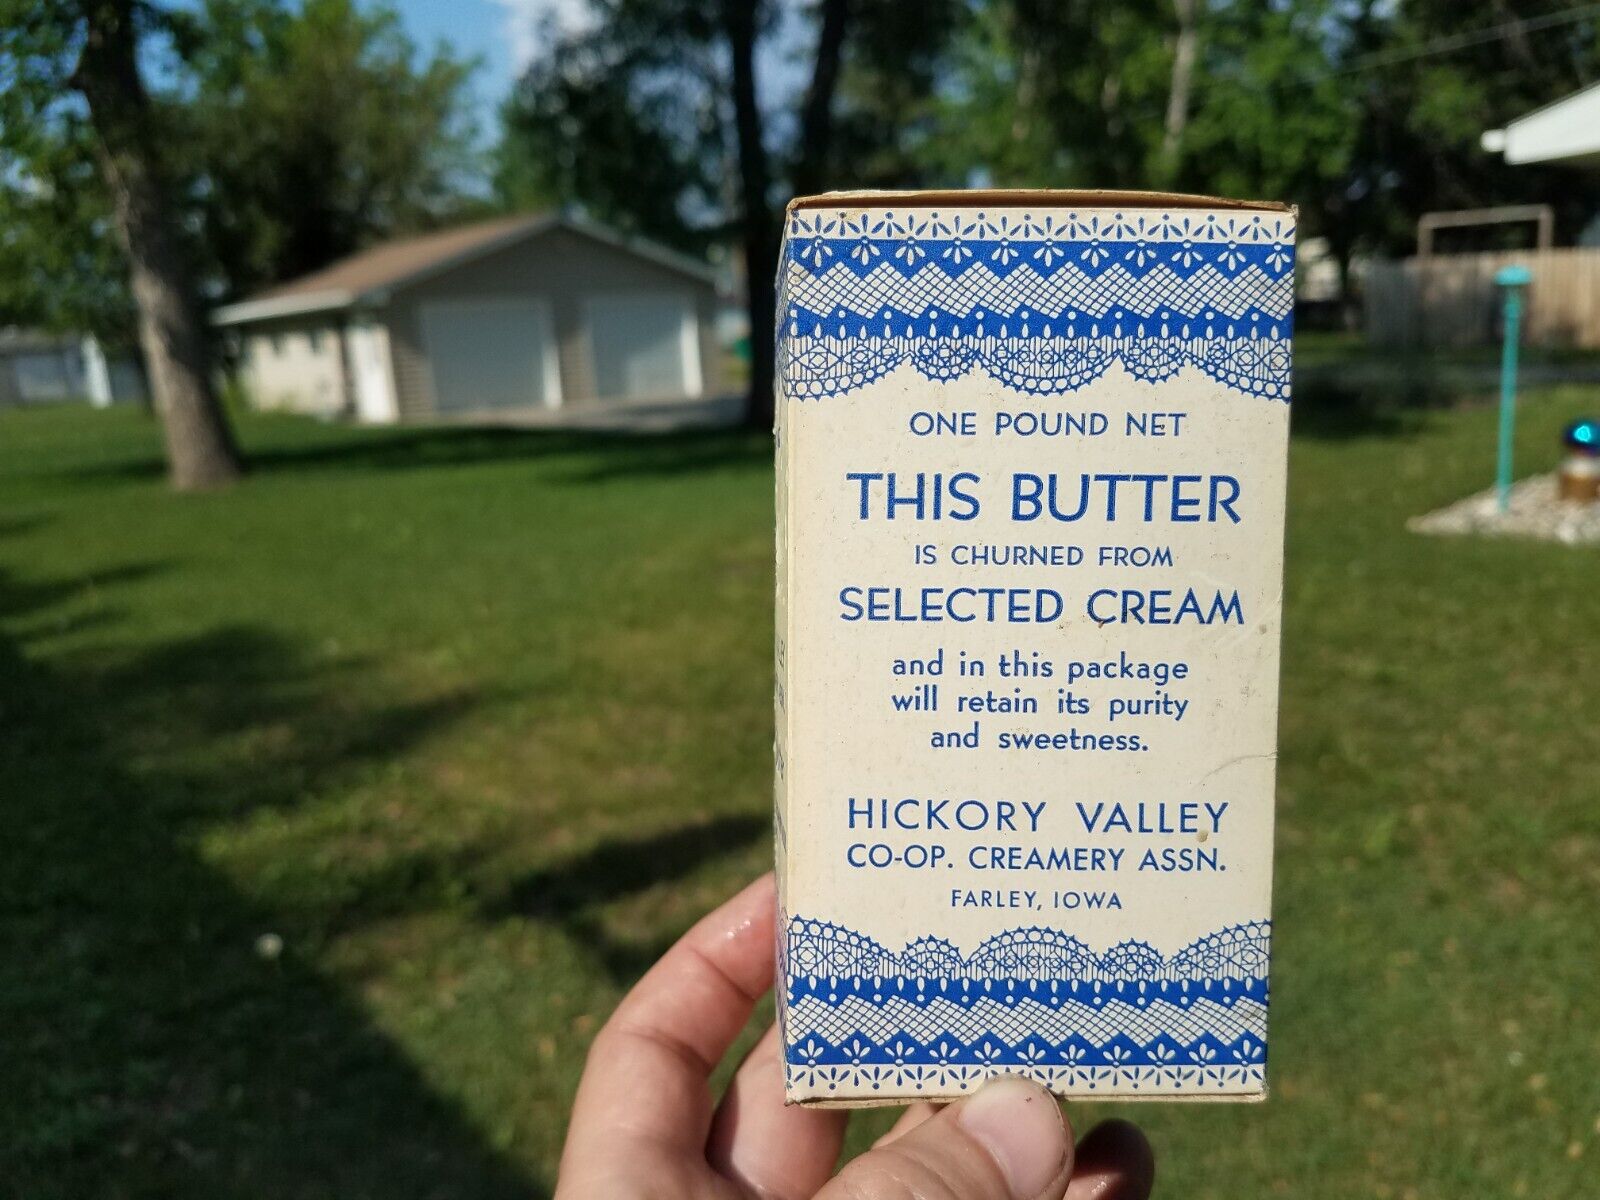 1935 Hickory Valley Co-Op Creamery Farley Iowa Butter Container